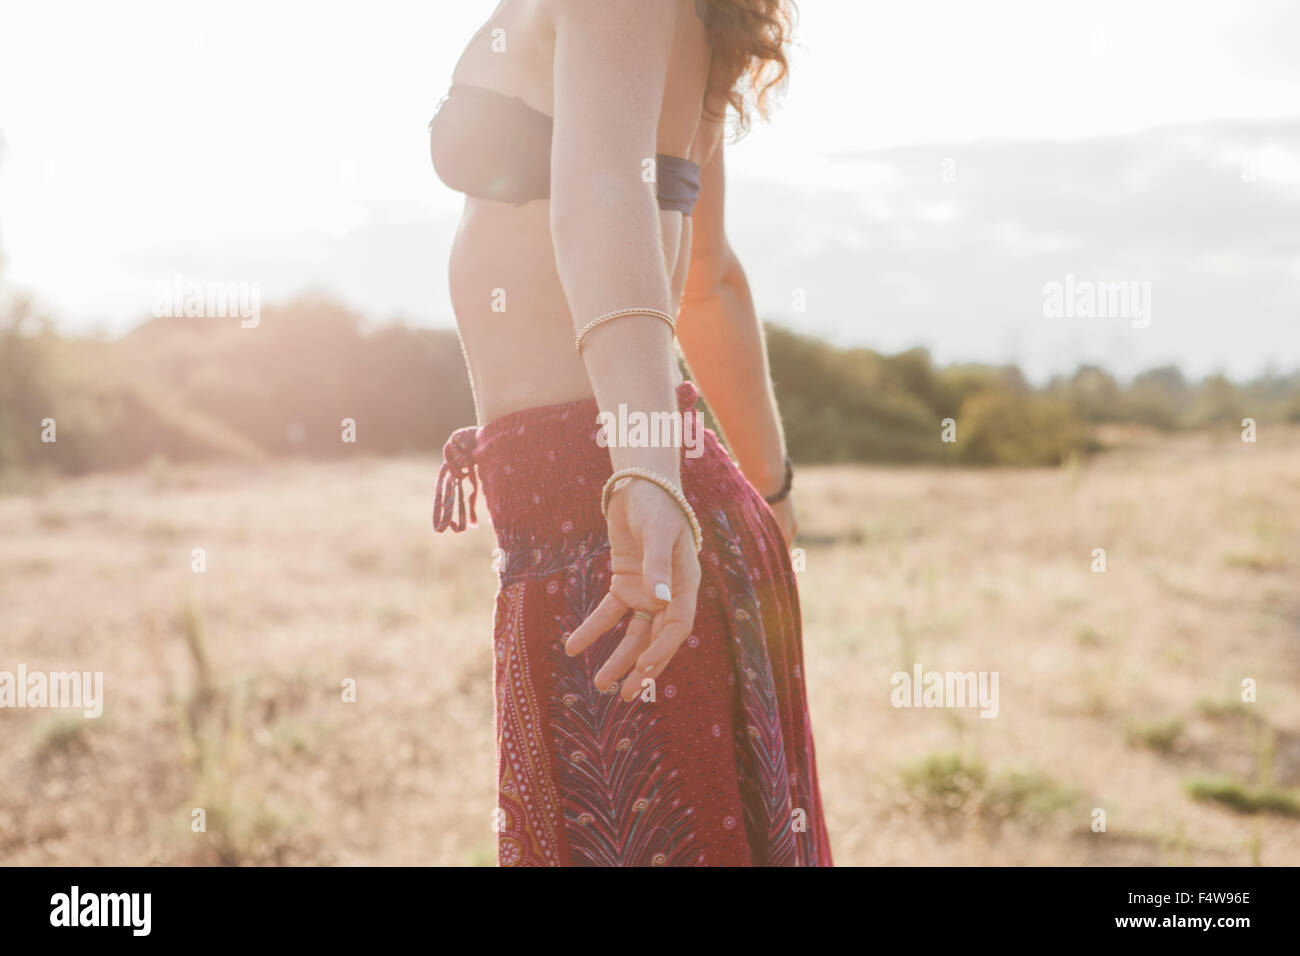 Boho woman in bikini top and skirt with arms outstretched in sunny rural field Stock Photo